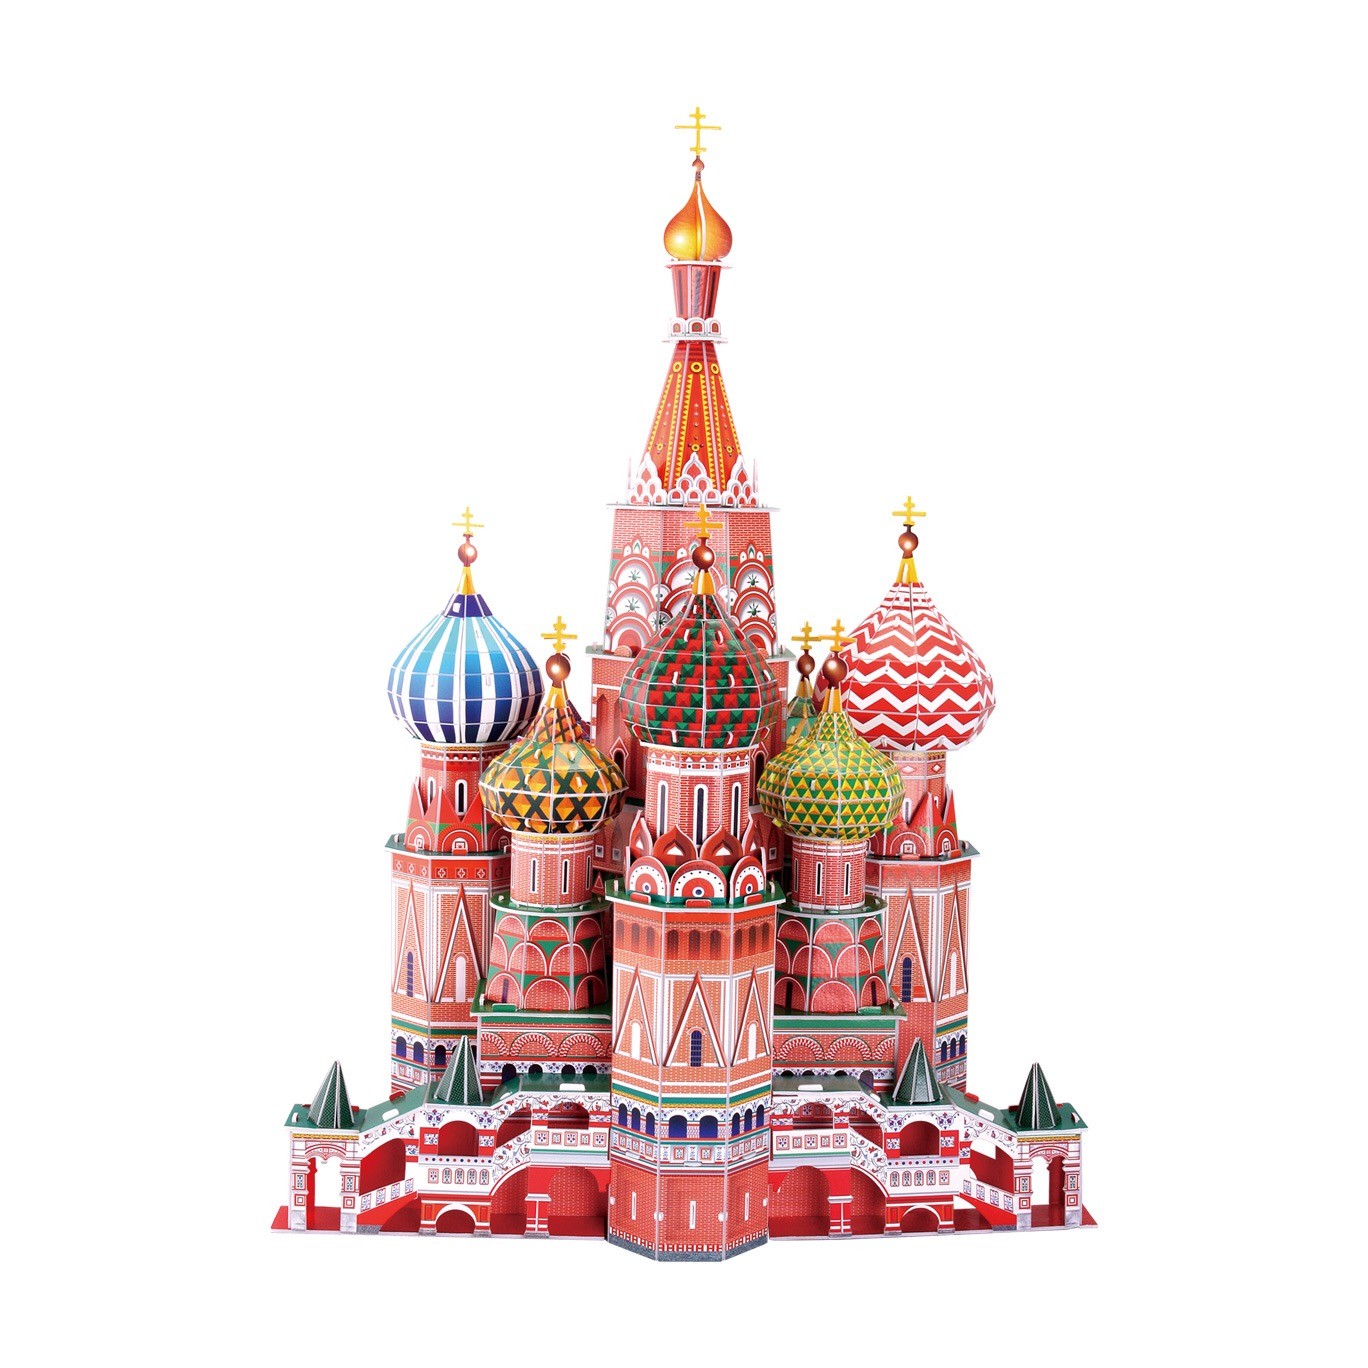 St.Basil's Cathedral